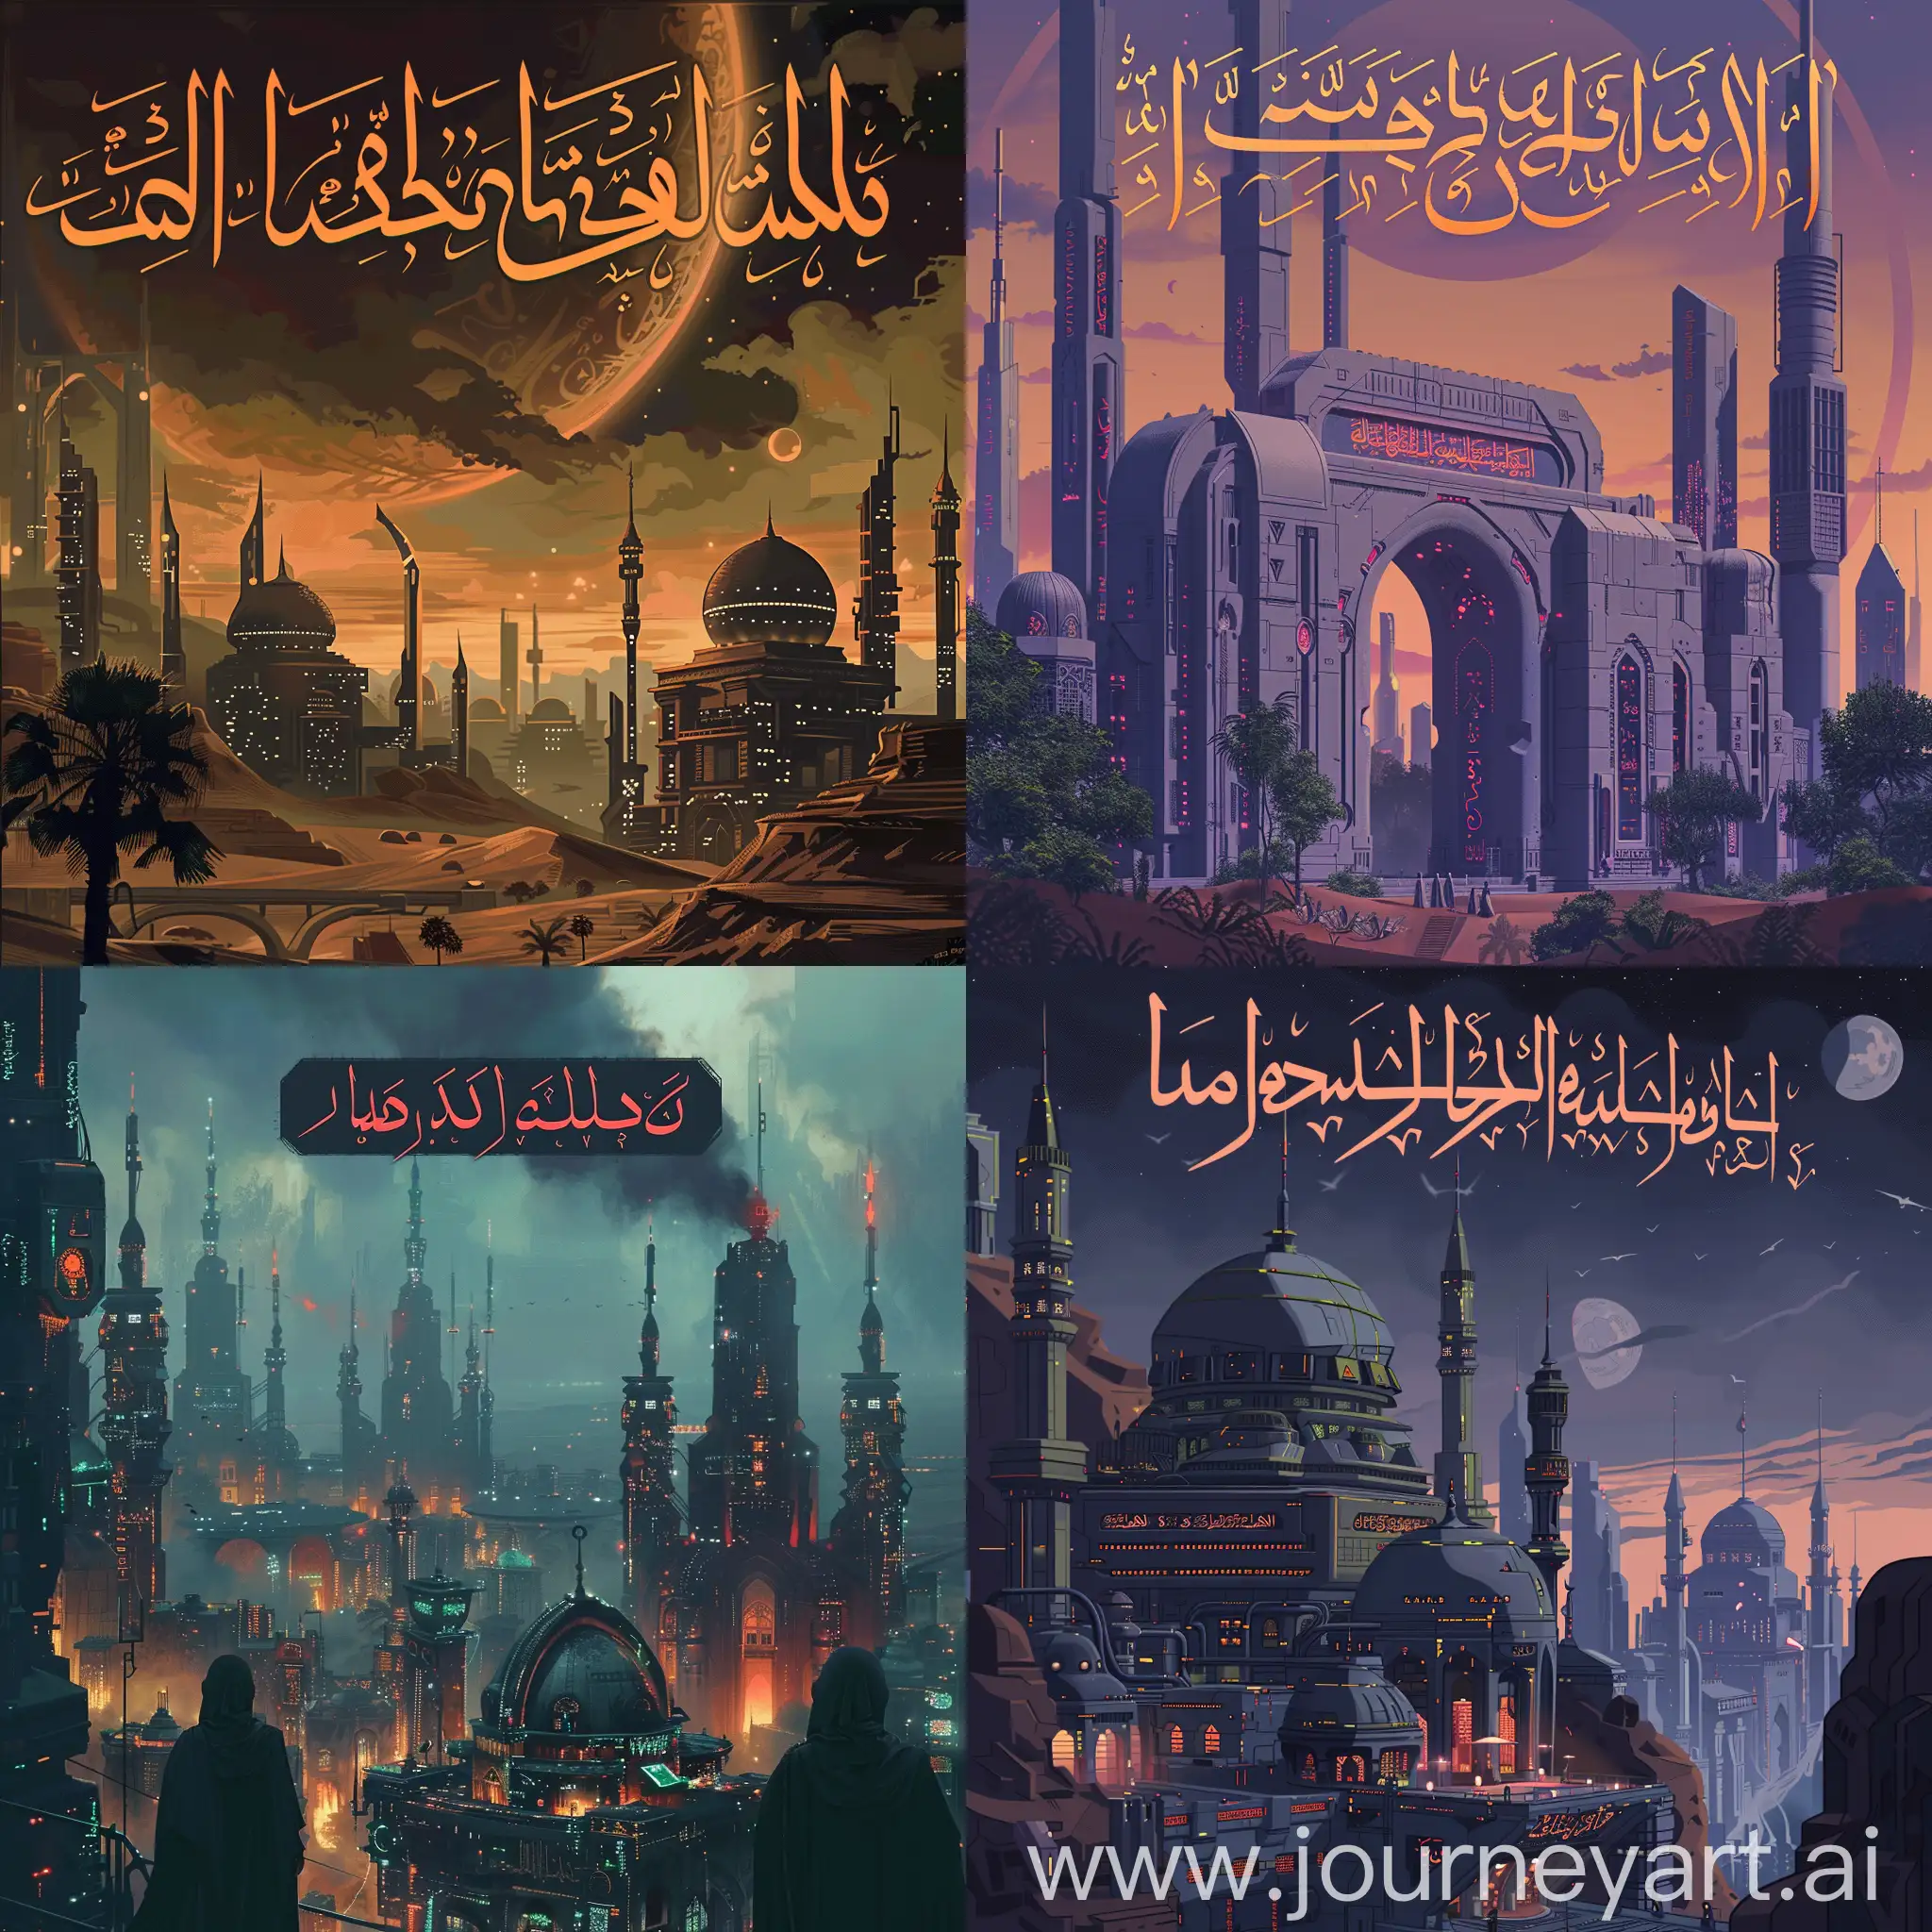 generate a Ramadan Mubarak image, with a cyberpunk Islamic architecture background, without any people in the image. Have the image have the writing "رمضان مبارك" in Arabic. Make the Arabic writing conforming to the historical Arabic calligraphic writing styles.